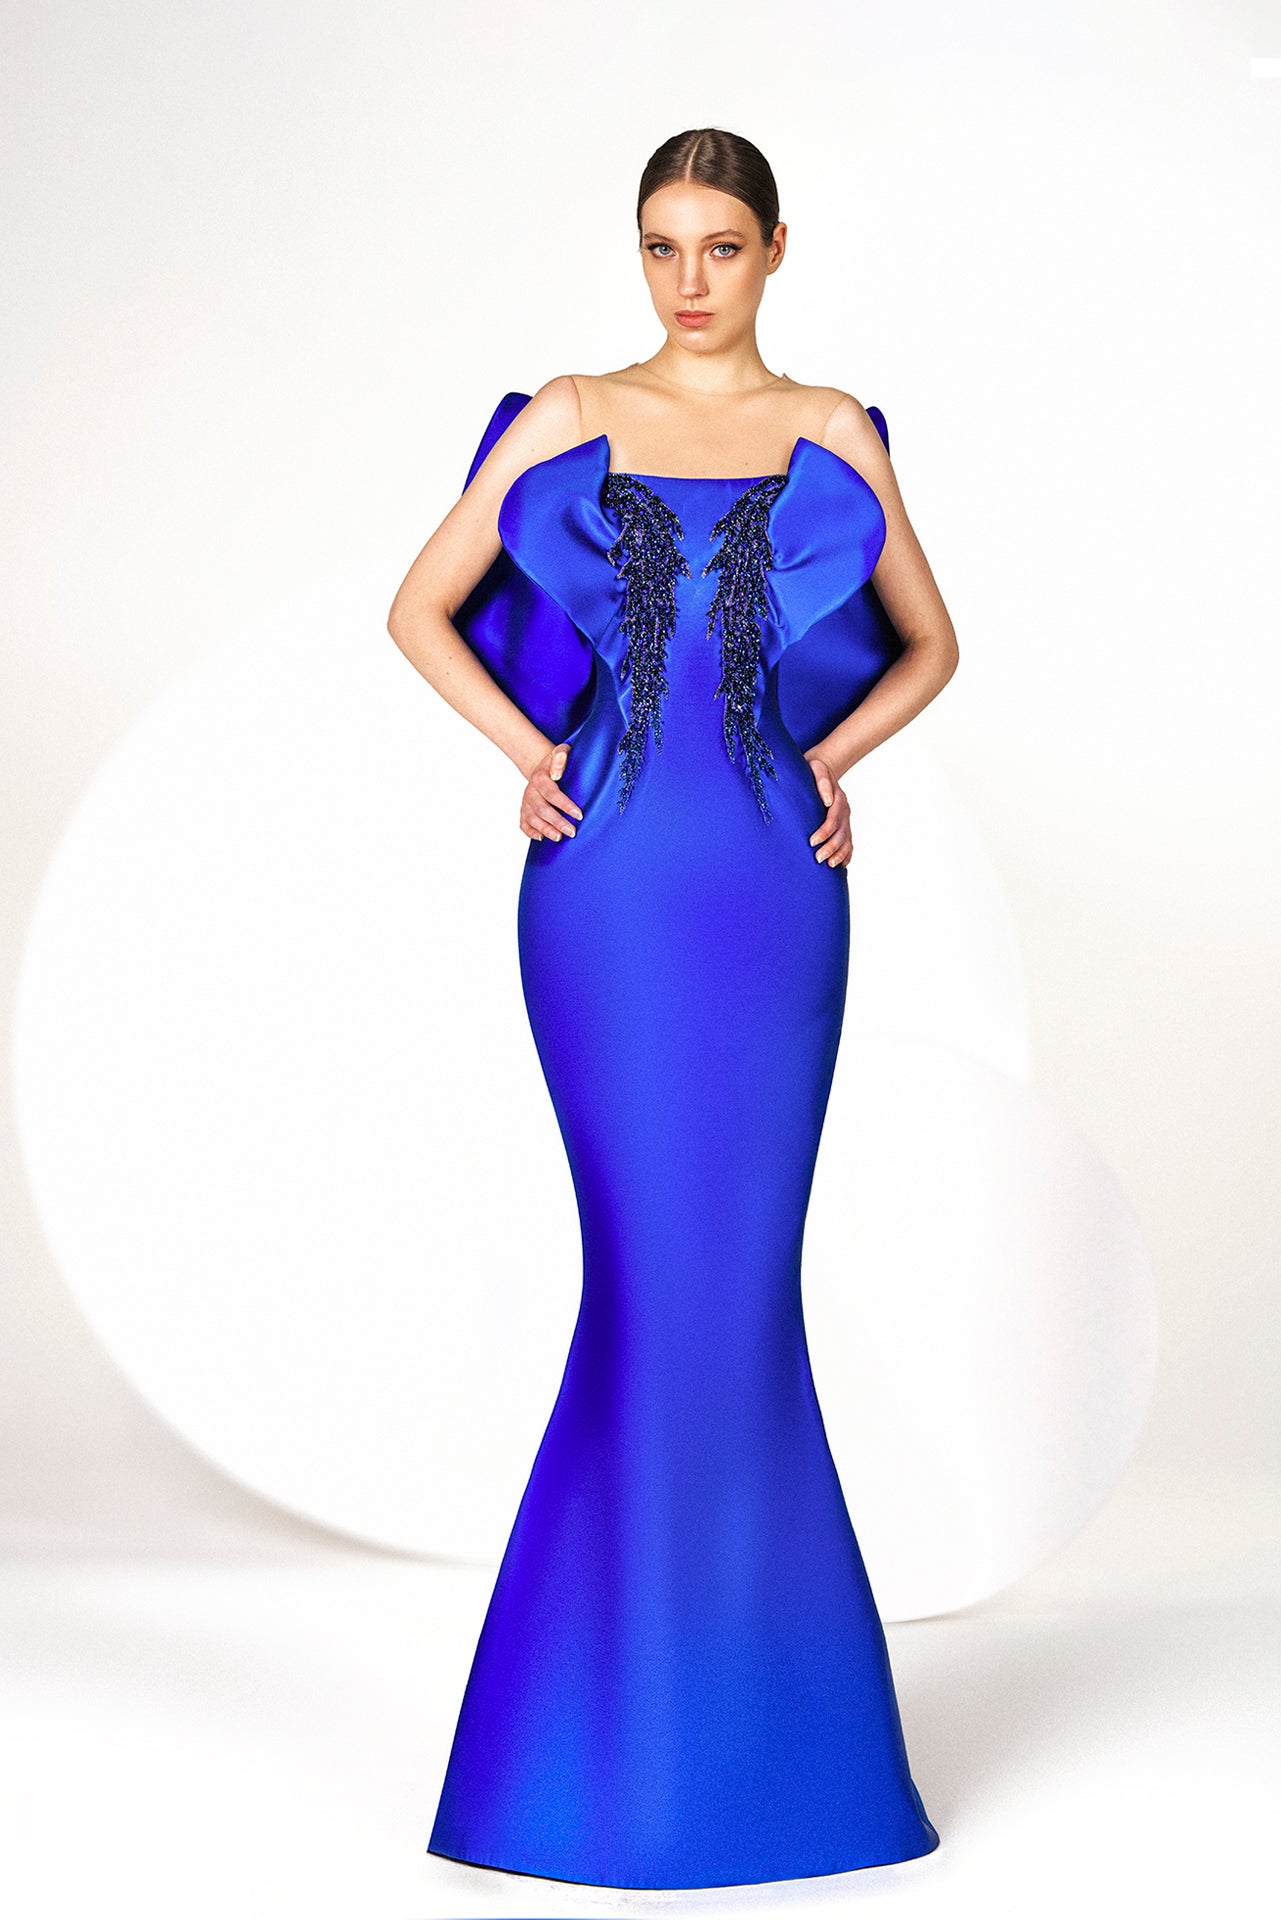 Royal Blue Cady Evening Dress with Symmetrical Ruffles in a